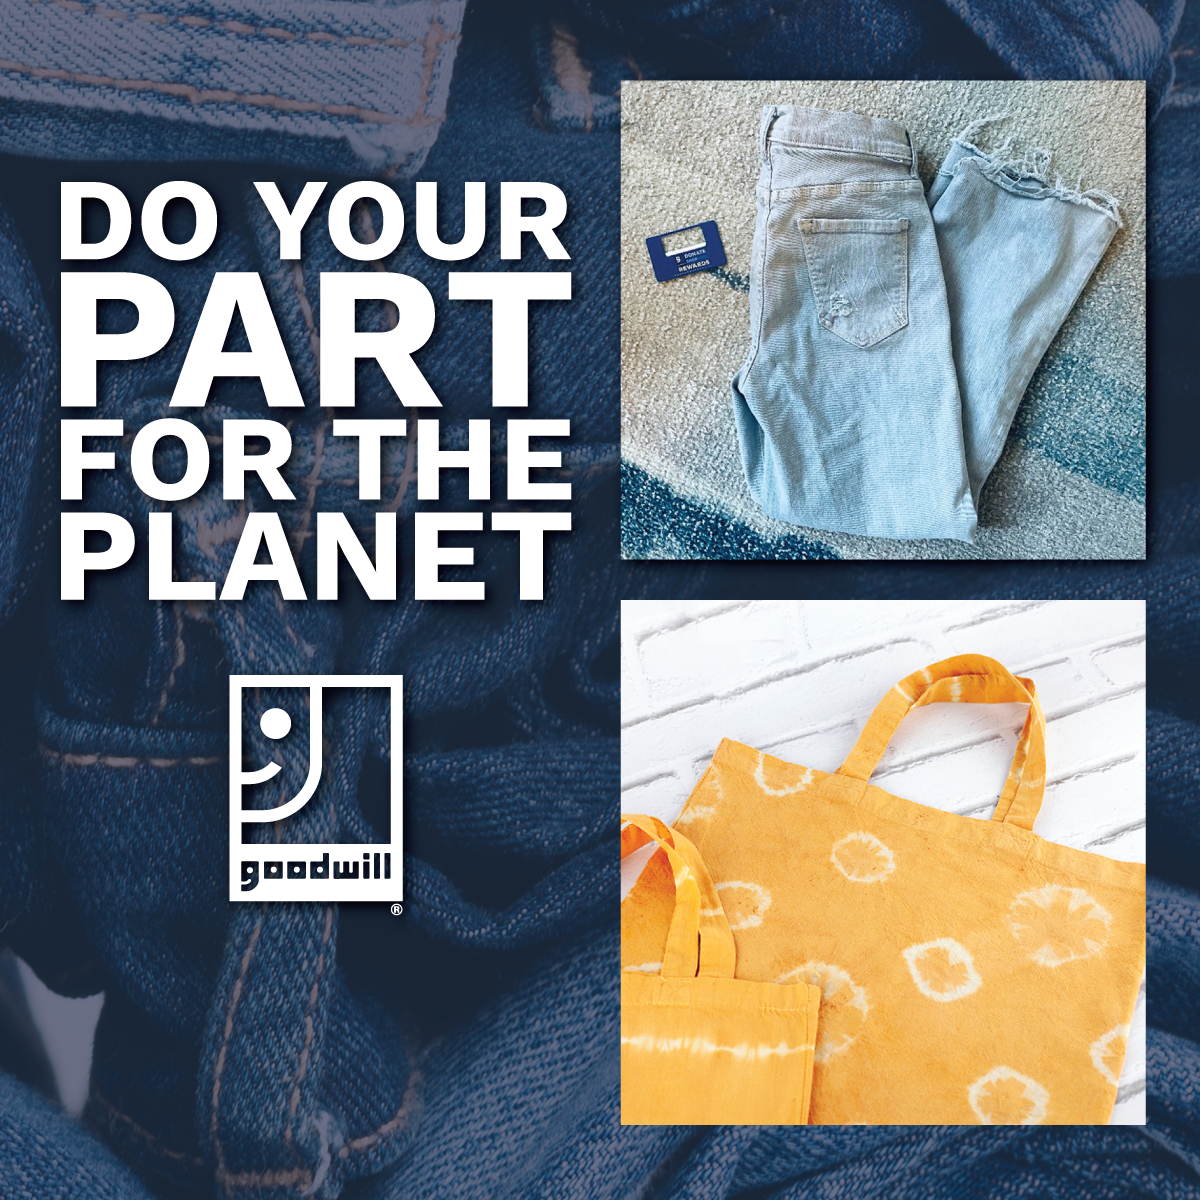 Shopping At Goodwill Can Help You Do Your Part for the Planet